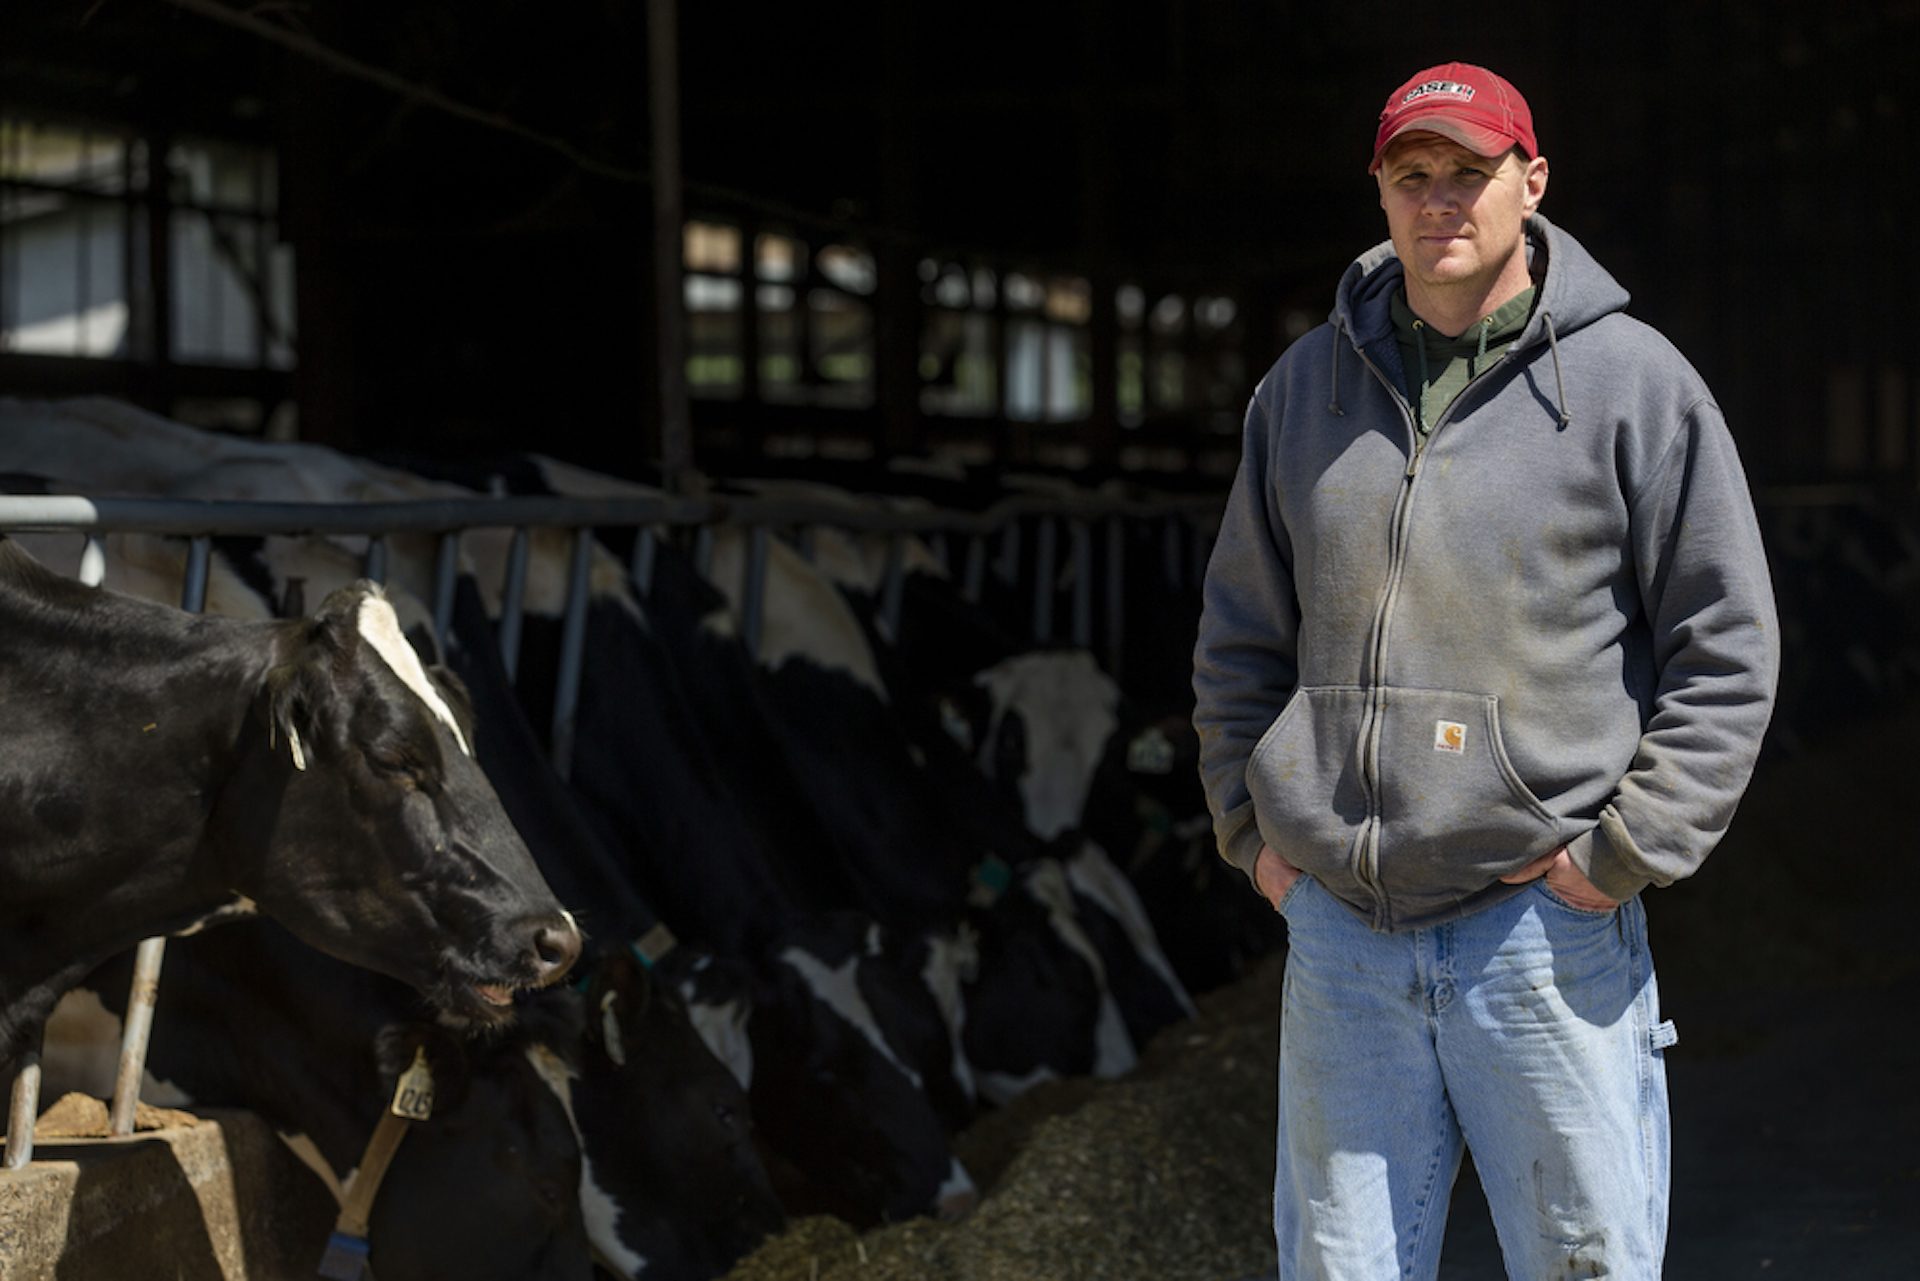 Donny Bartch, owner of Marrimart Farms, has 260 Holstein cows on his Loysville, Pa., family farm, Apr. 11, 2020.